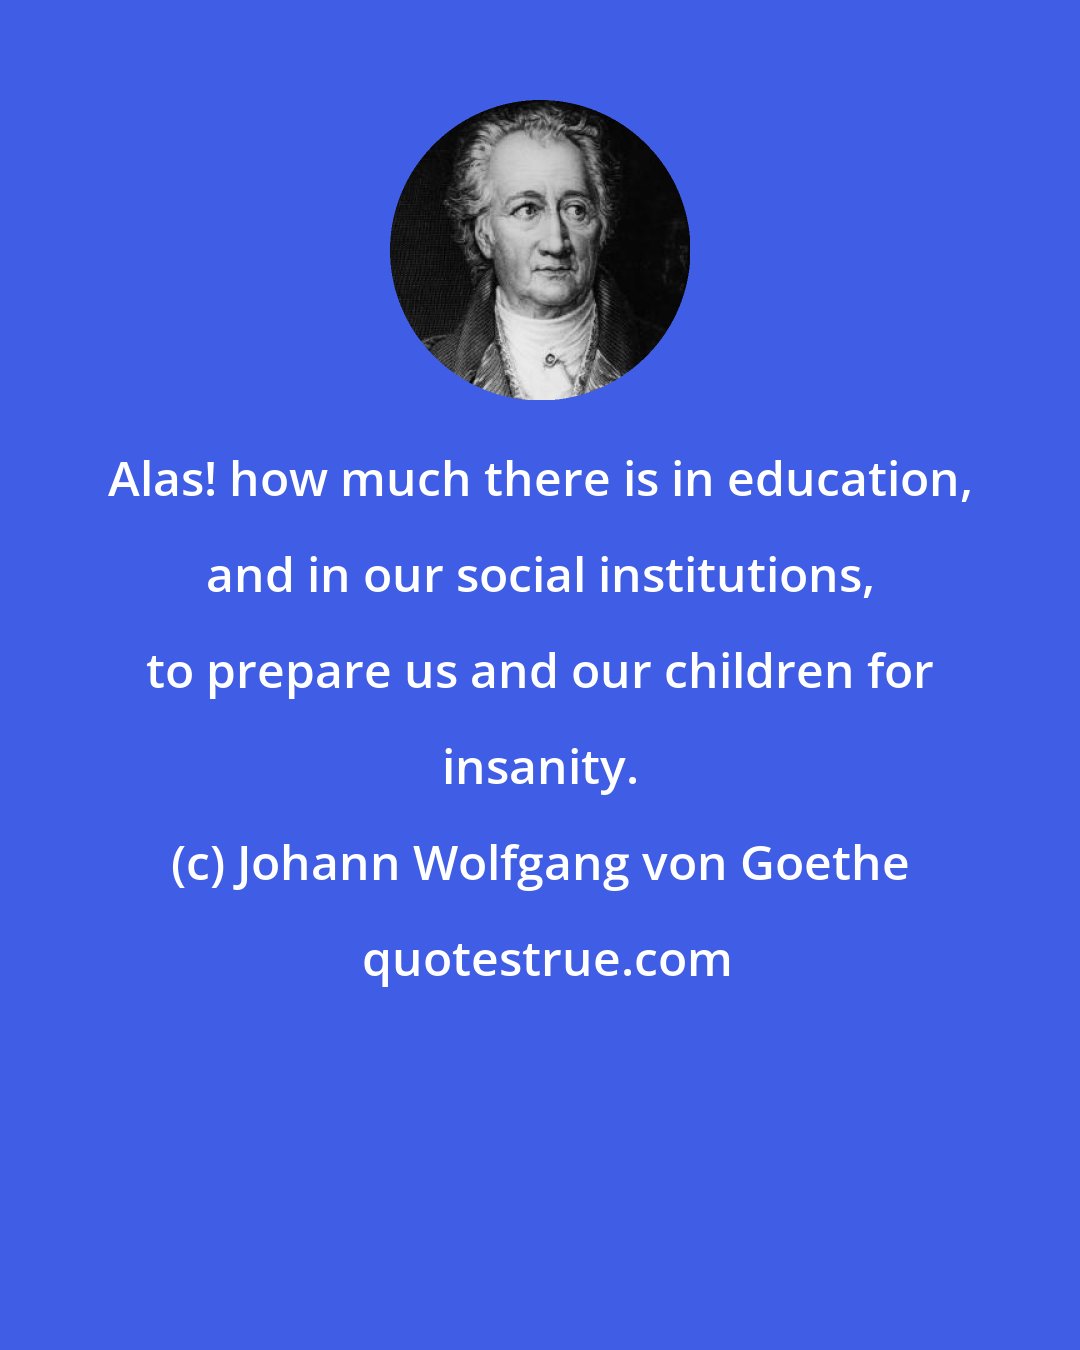 Johann Wolfgang von Goethe: Alas! how much there is in education, and in our social institutions, to prepare us and our children for insanity.